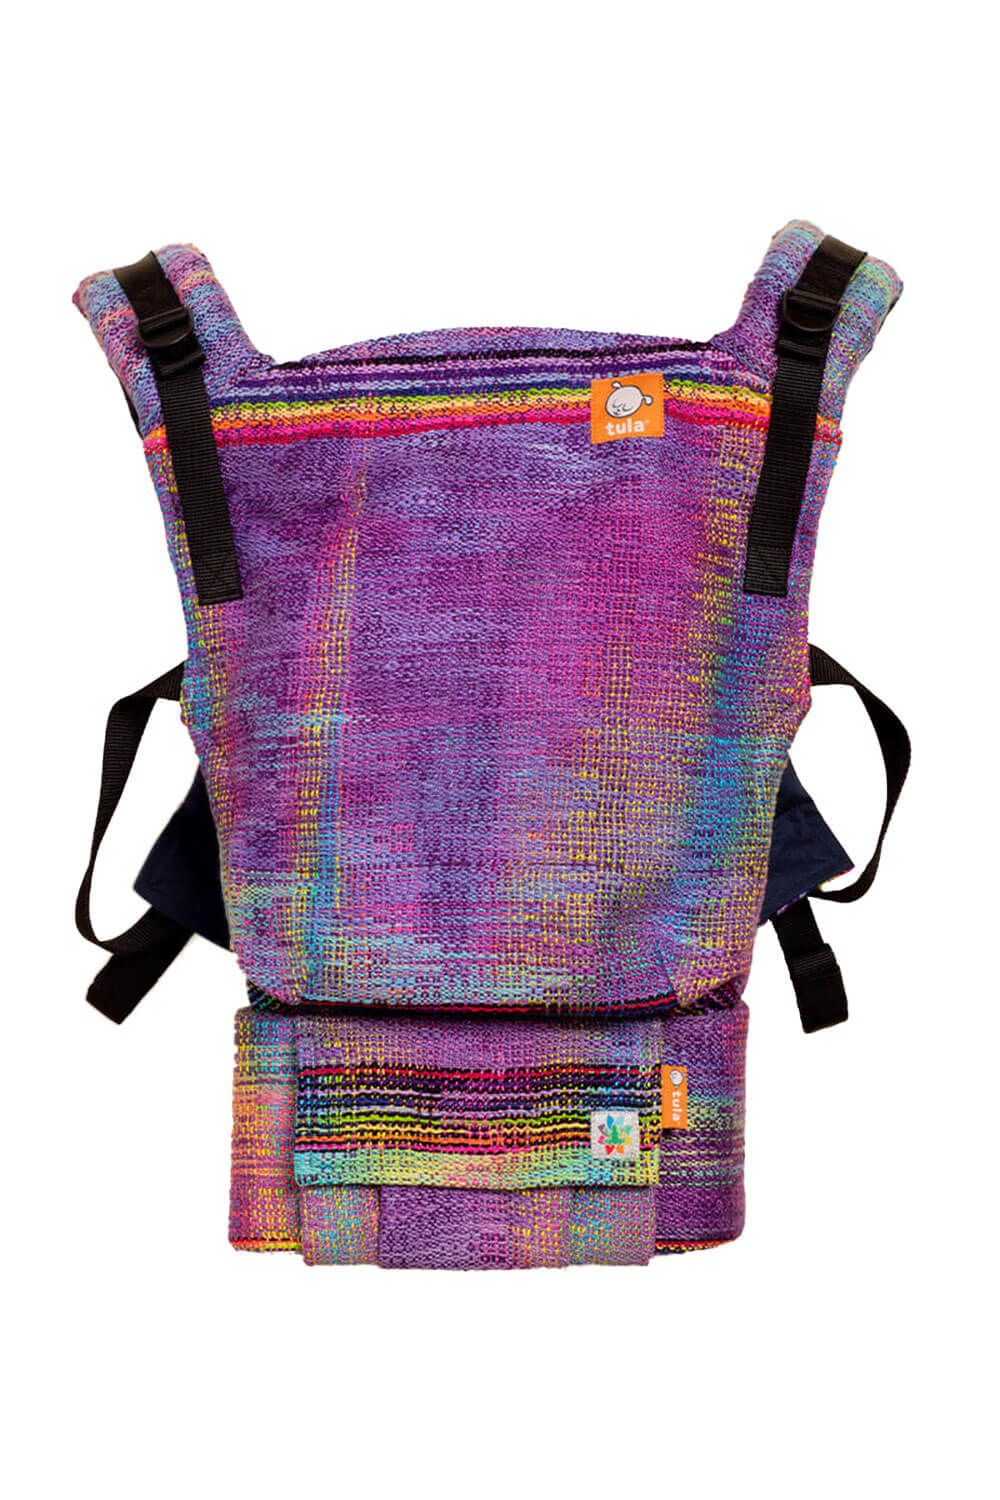 Pixie Stix - Signature Handwoven Free-to-Grow Baby Carrier